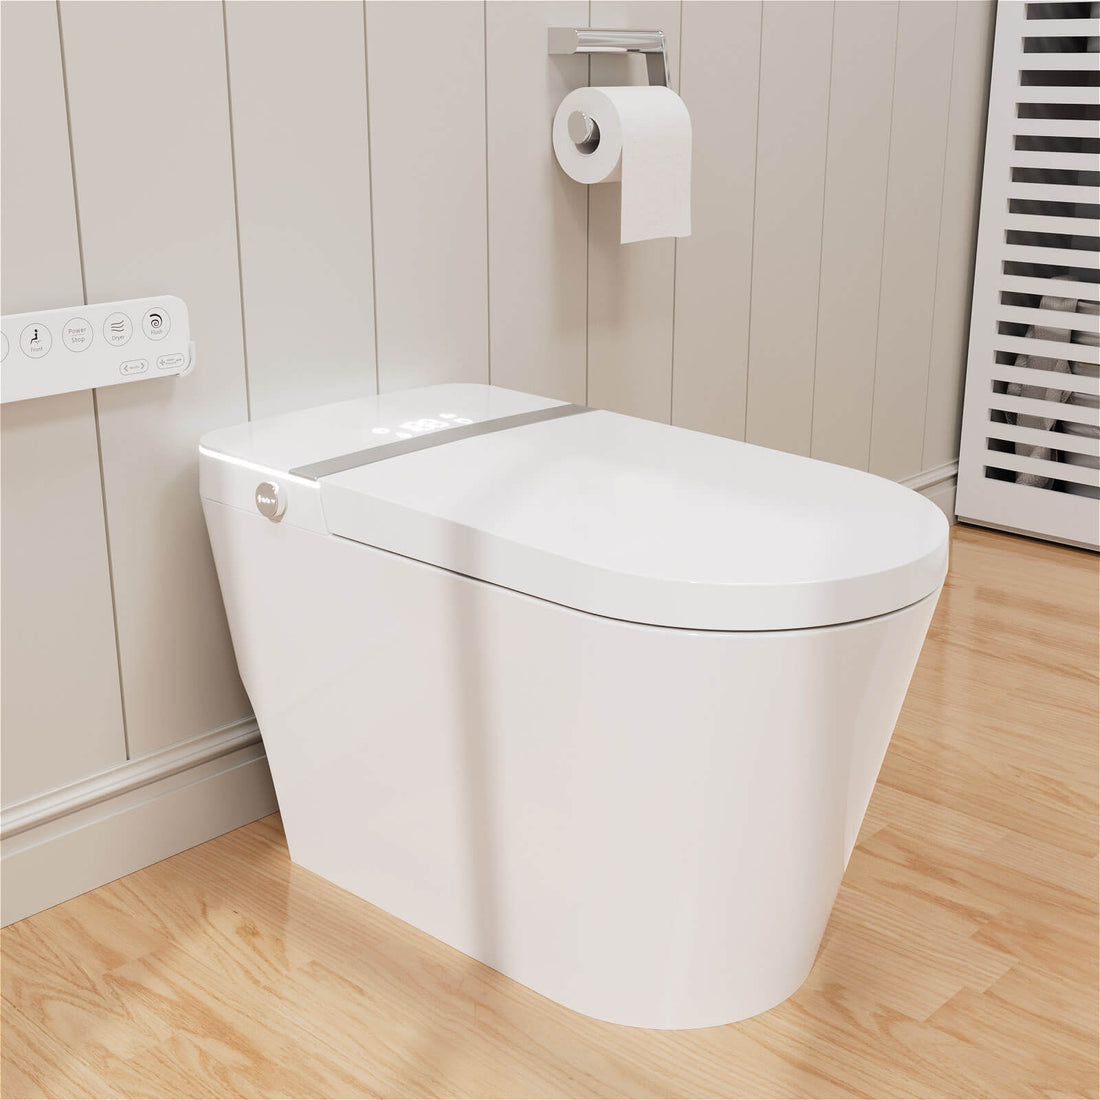 Modern Heated Seat Smart Bidet Toilet with Ambient Light Auto-flush Air Drying and Remote Control